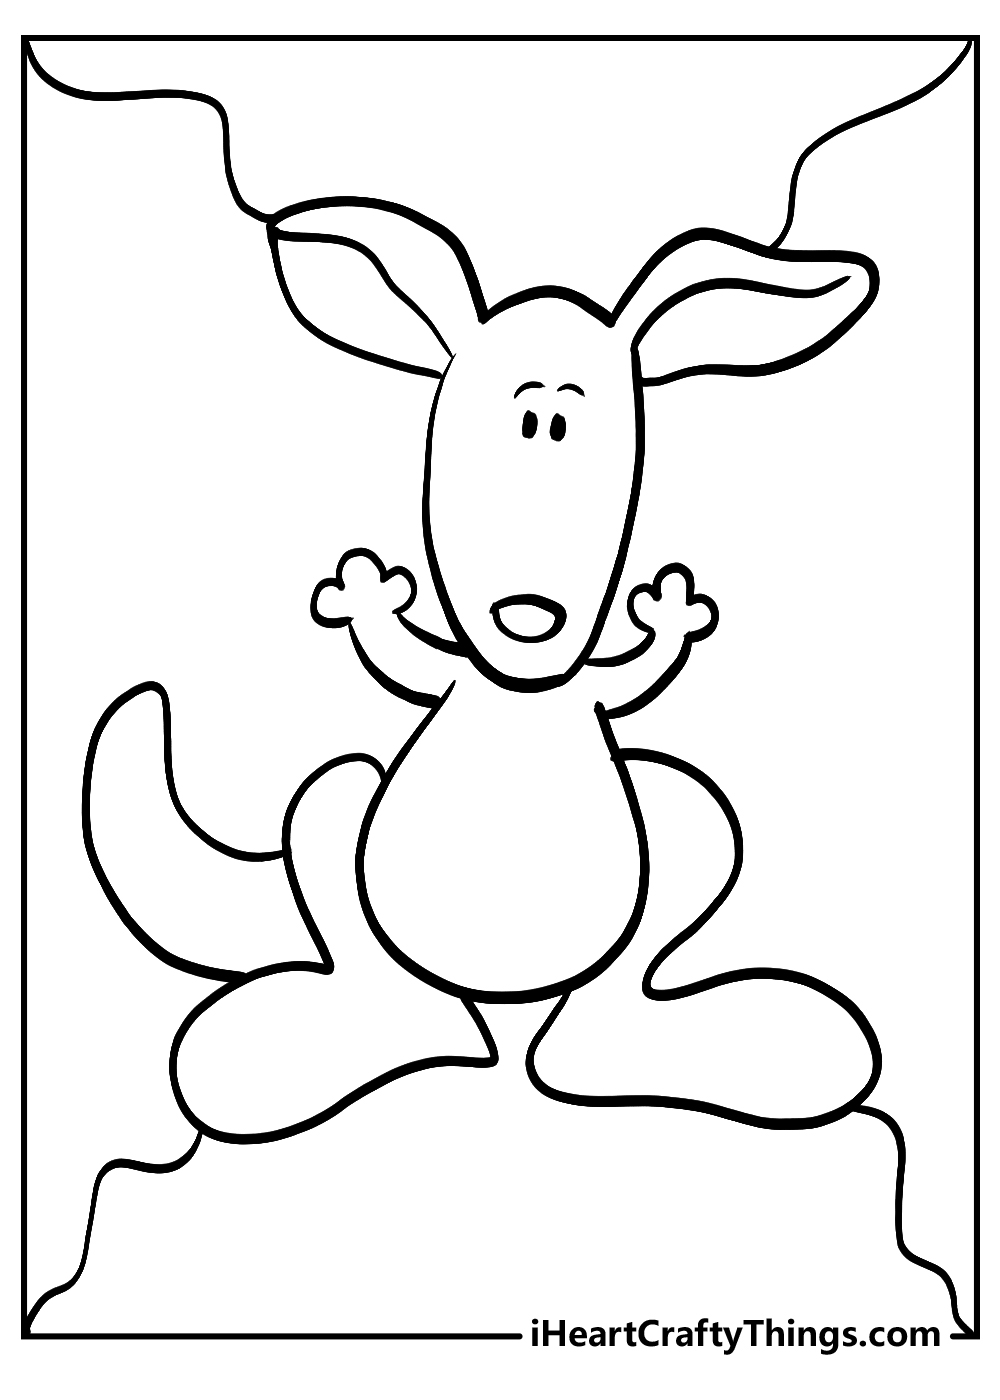 easy blue's clues coloring activity book